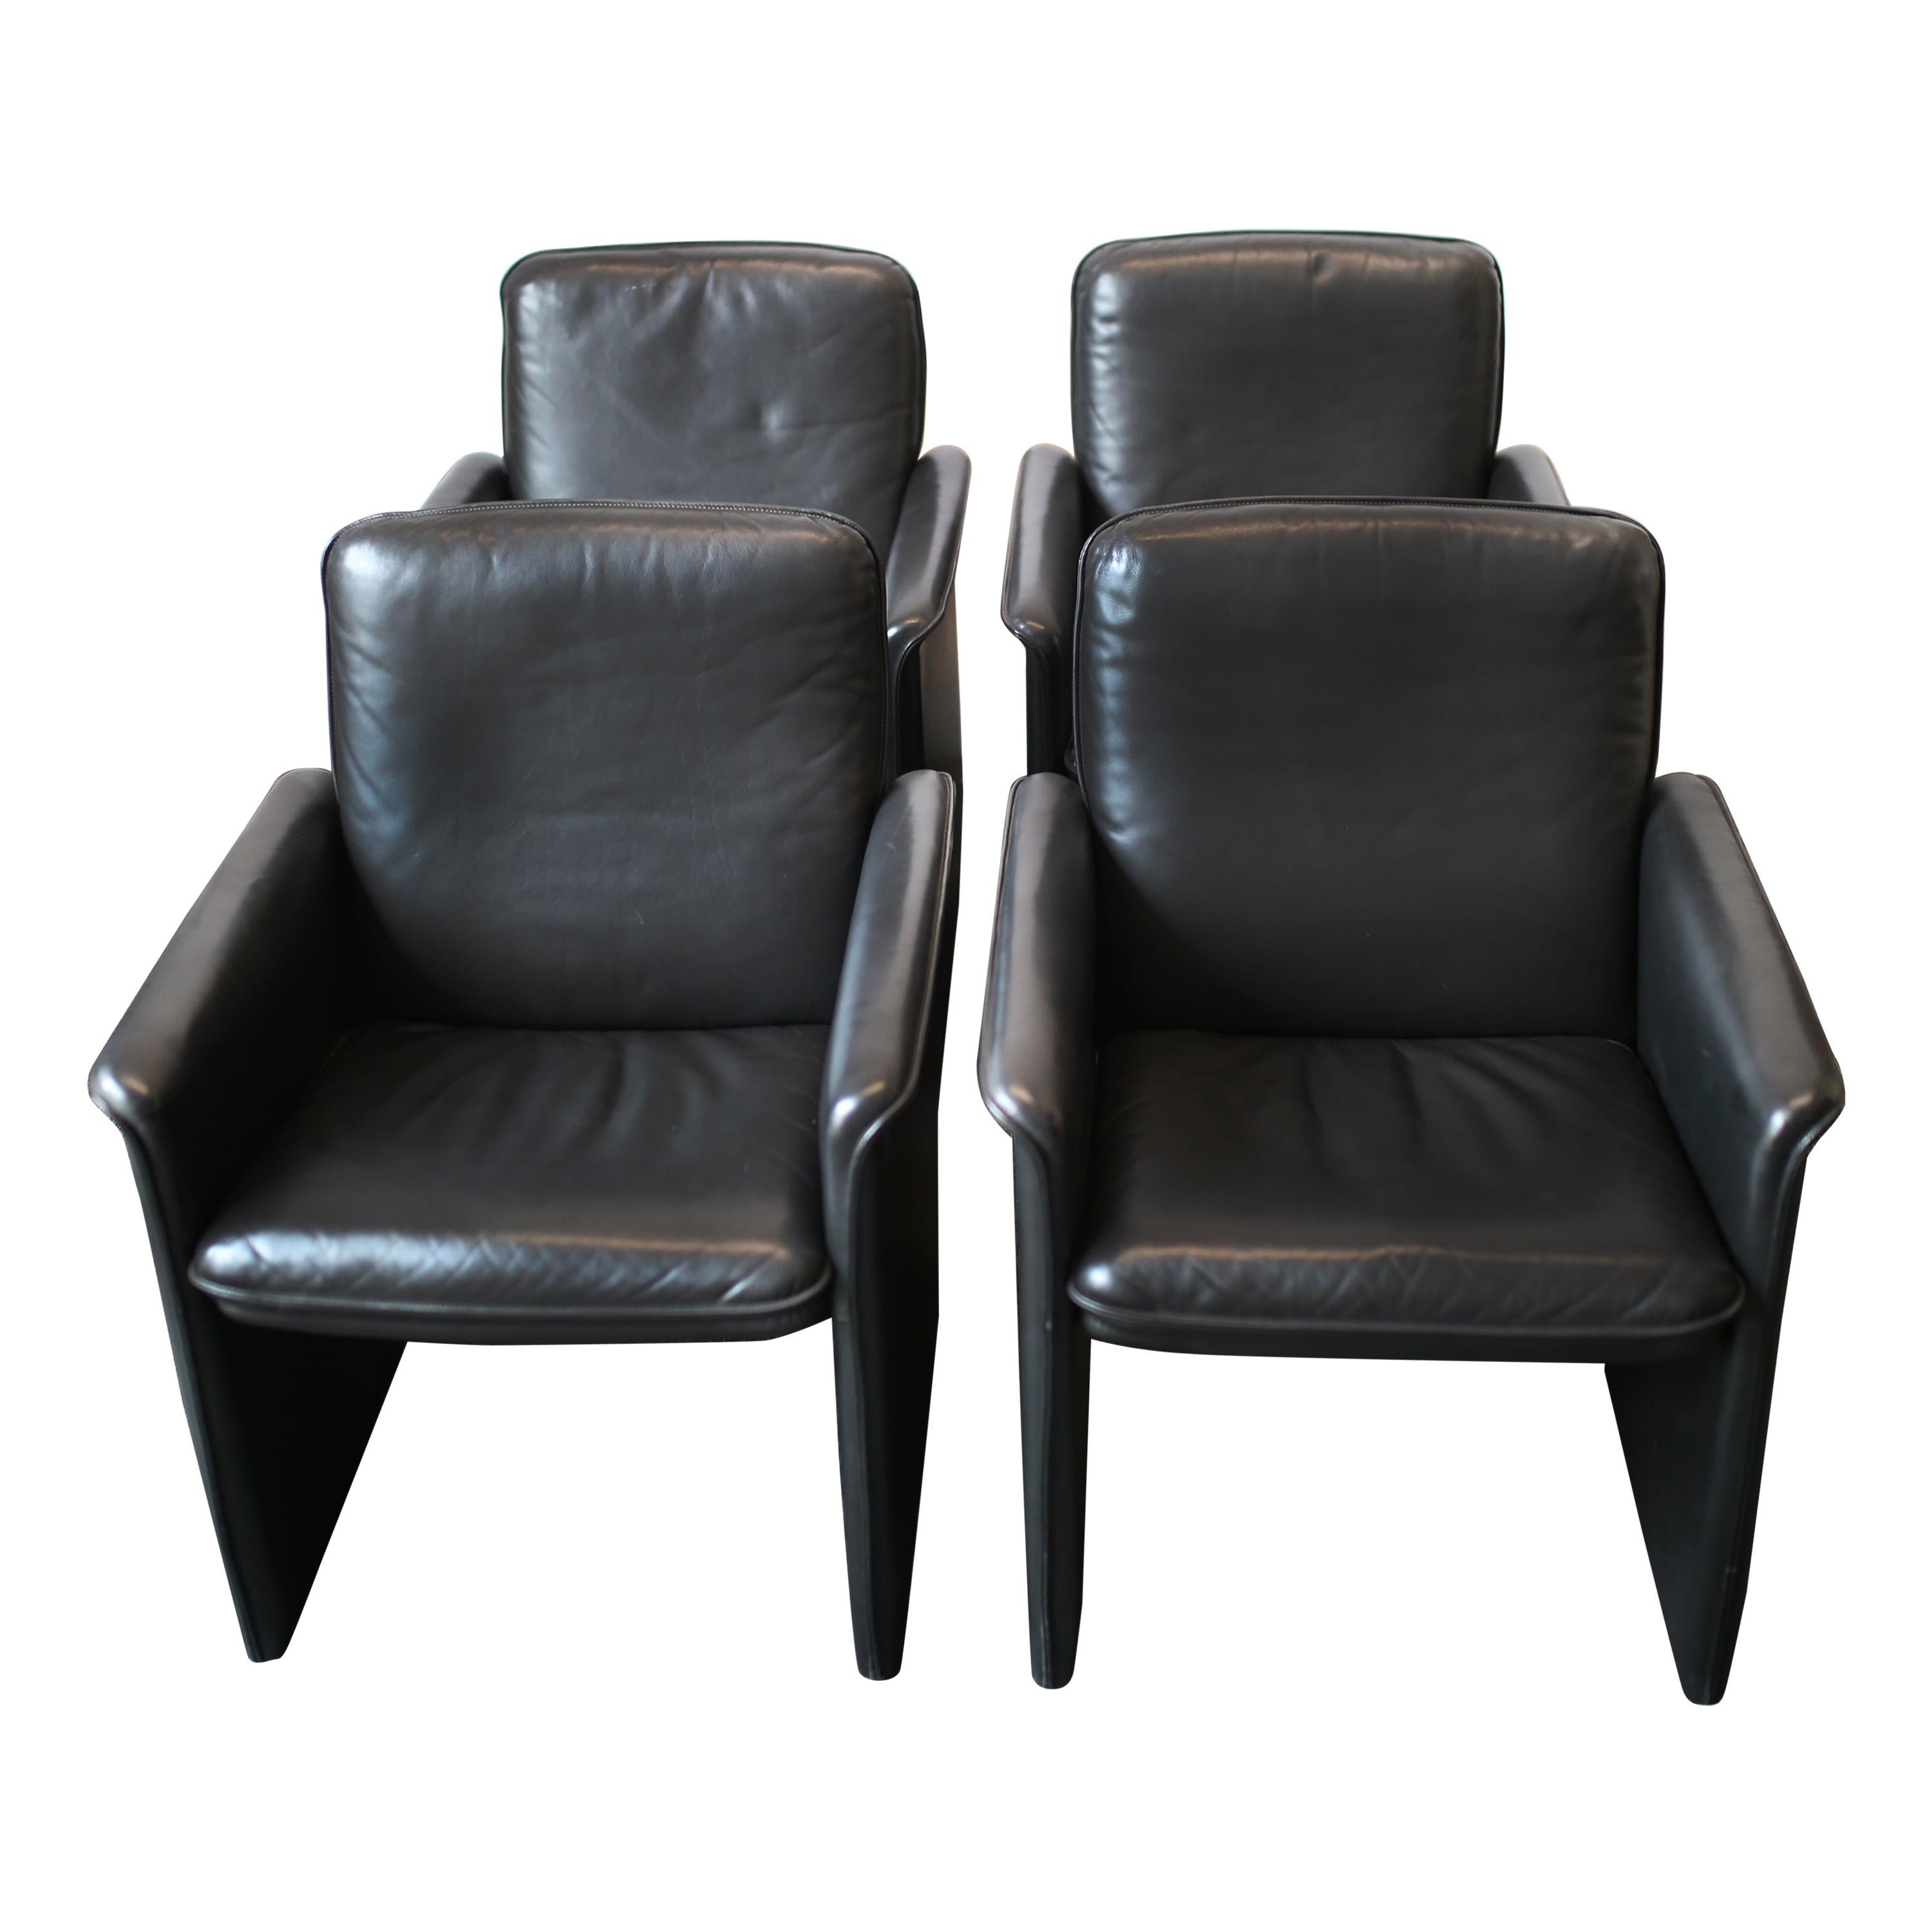 Set of Four Mid-Century Modern Solid Black Leather Chairs by De Sede, 1970s